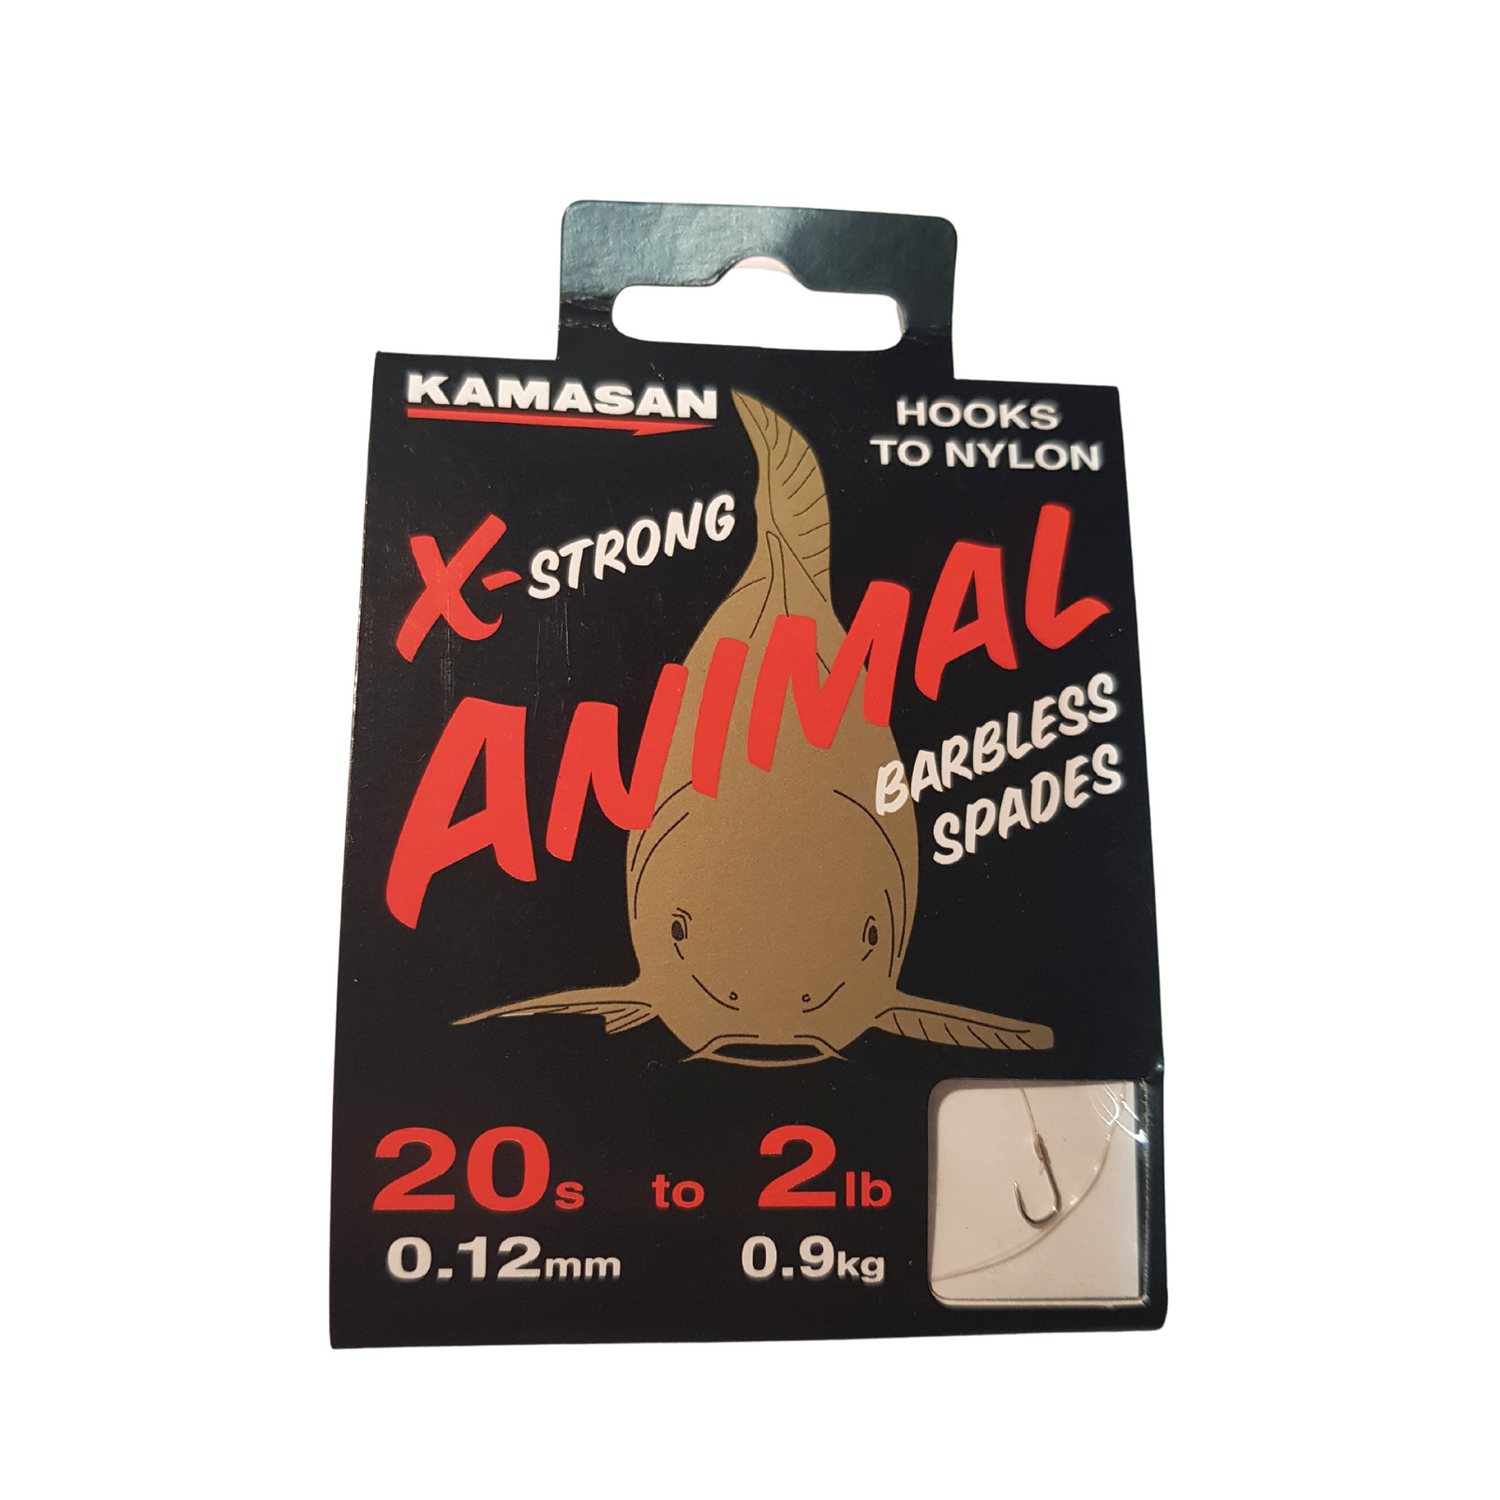 Kamasan Animal X-Strong Size 20 Hooks to Nylon. Ideal For Float Or Feeder Fishing.